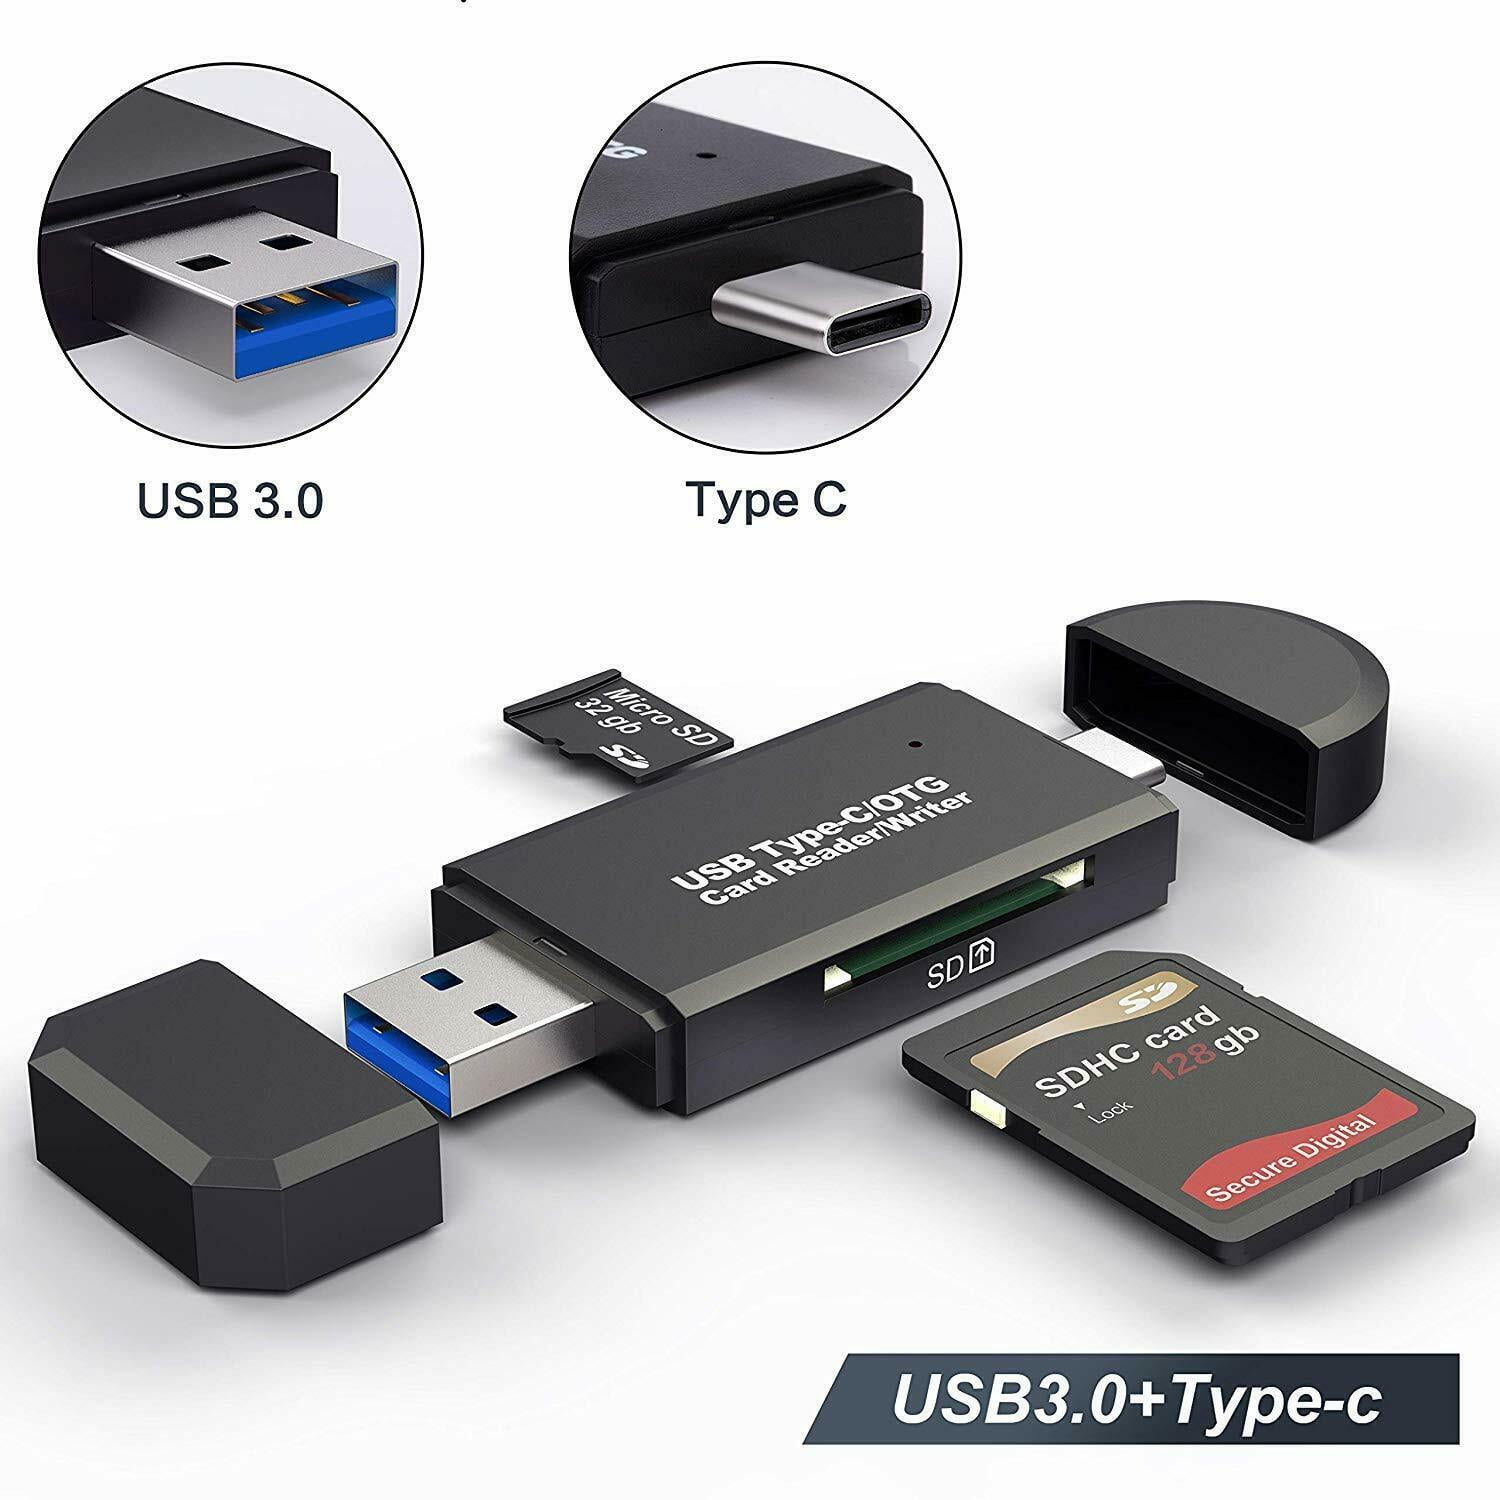 Micro SD Reader, 3-in-1 USB 2.0 Memory Card Reader for PC/Laptop/Smart Phones/Tablets - Walmart.com